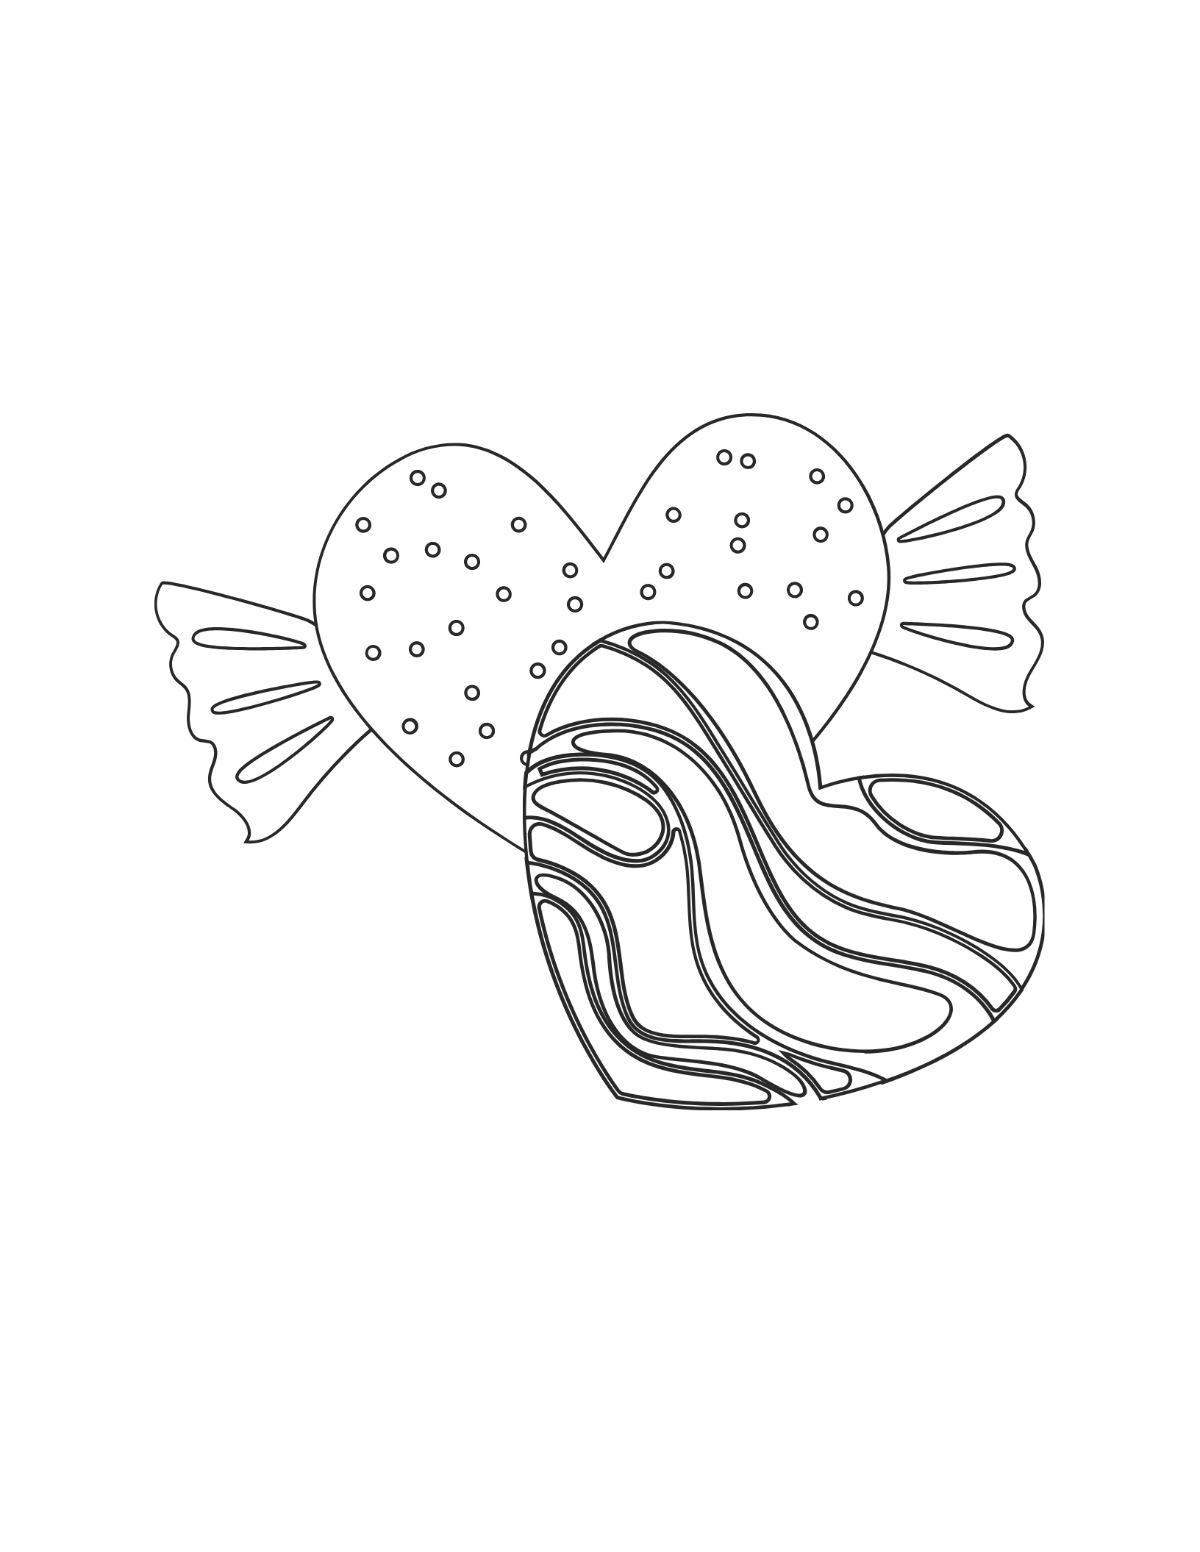 Free heart coloring page s examples